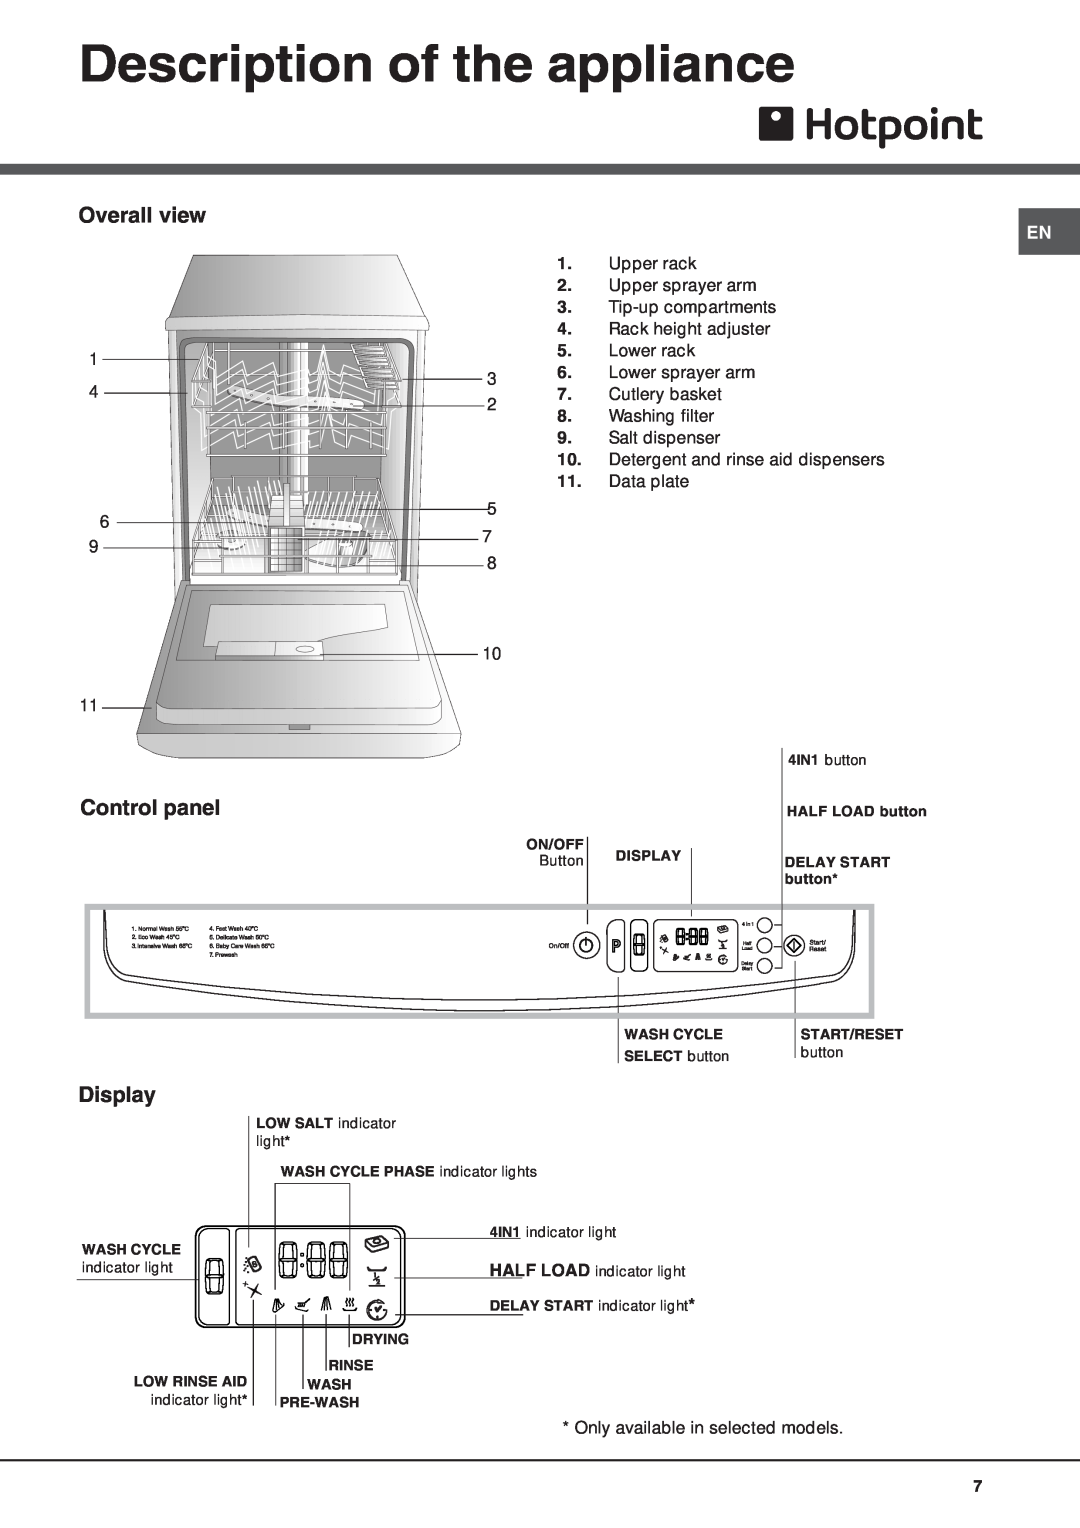 Hotpoint FDW 70, FDW 75 manual Description of the appliance, Overall view, Control panel, Display 